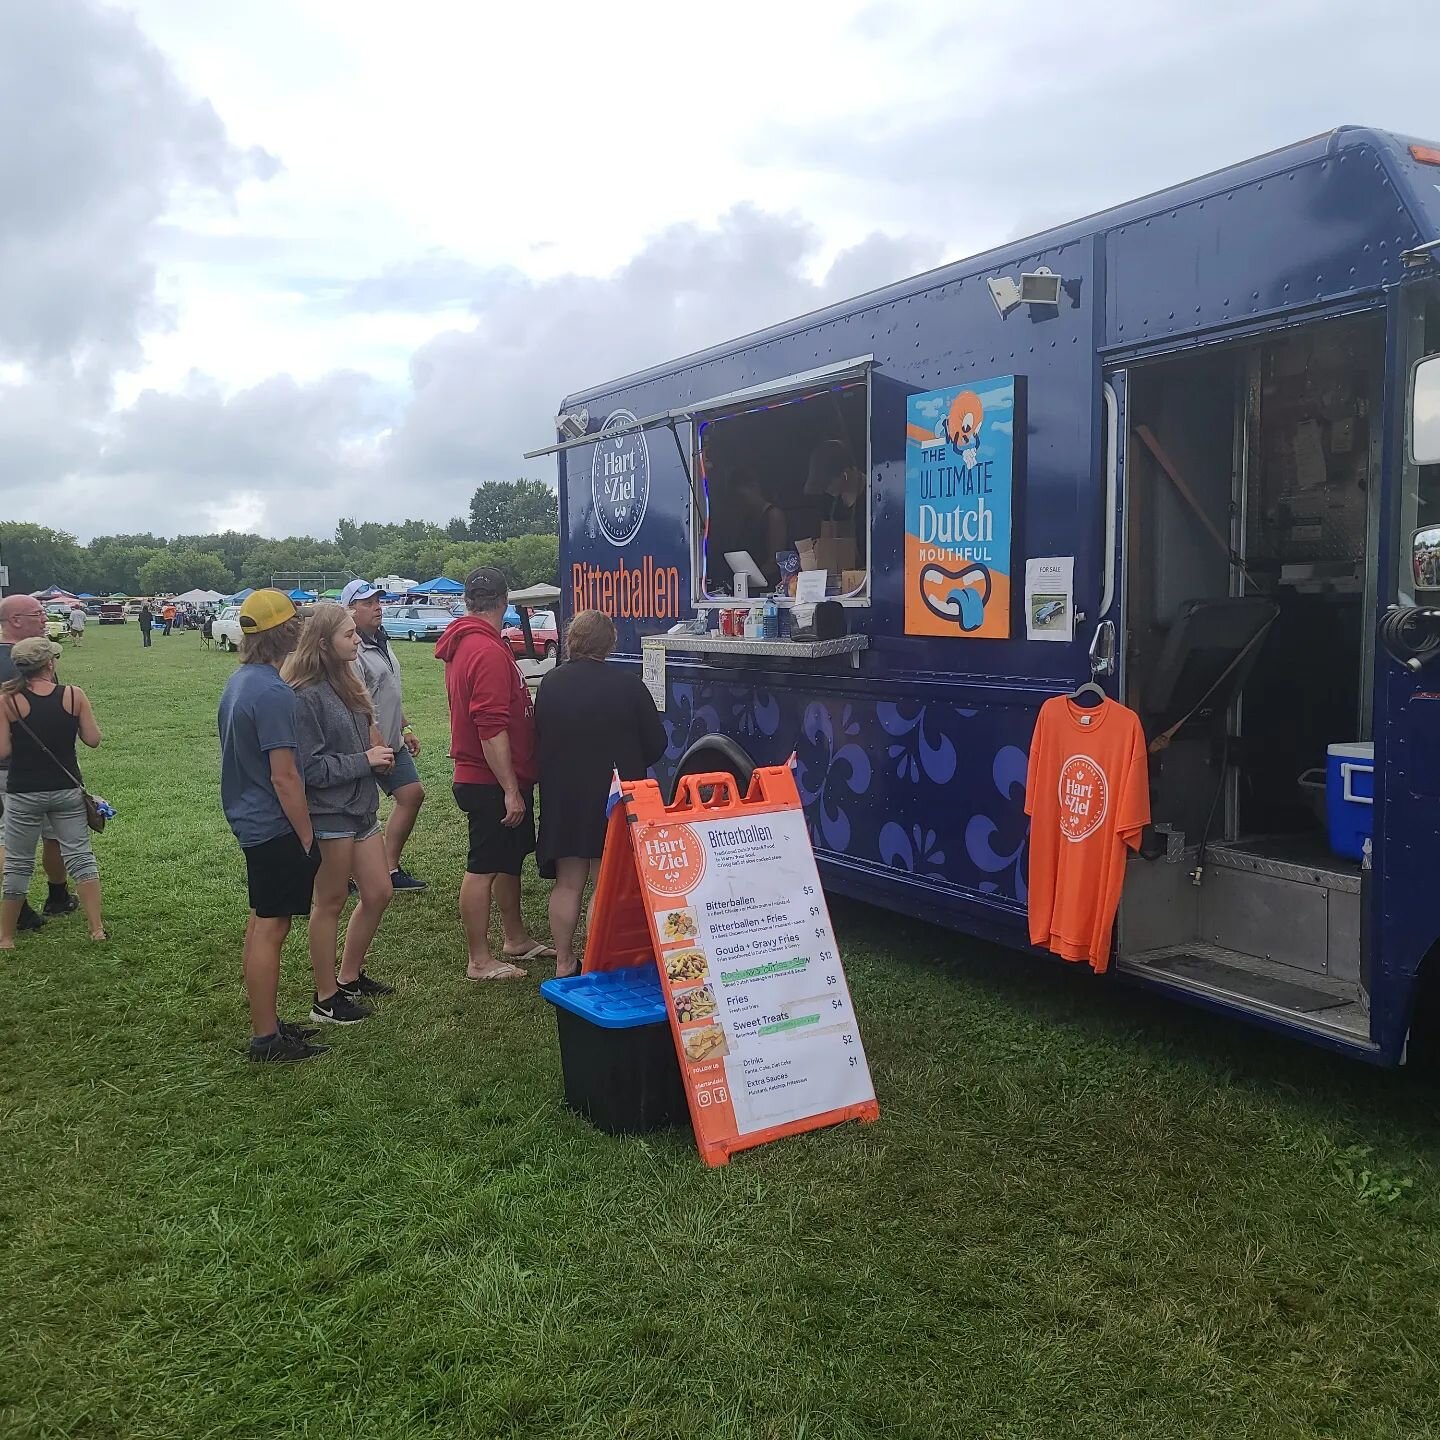 The weather is holding up here at Moparfest. Come check out our Food Truck and enjoy some Bitterballen!